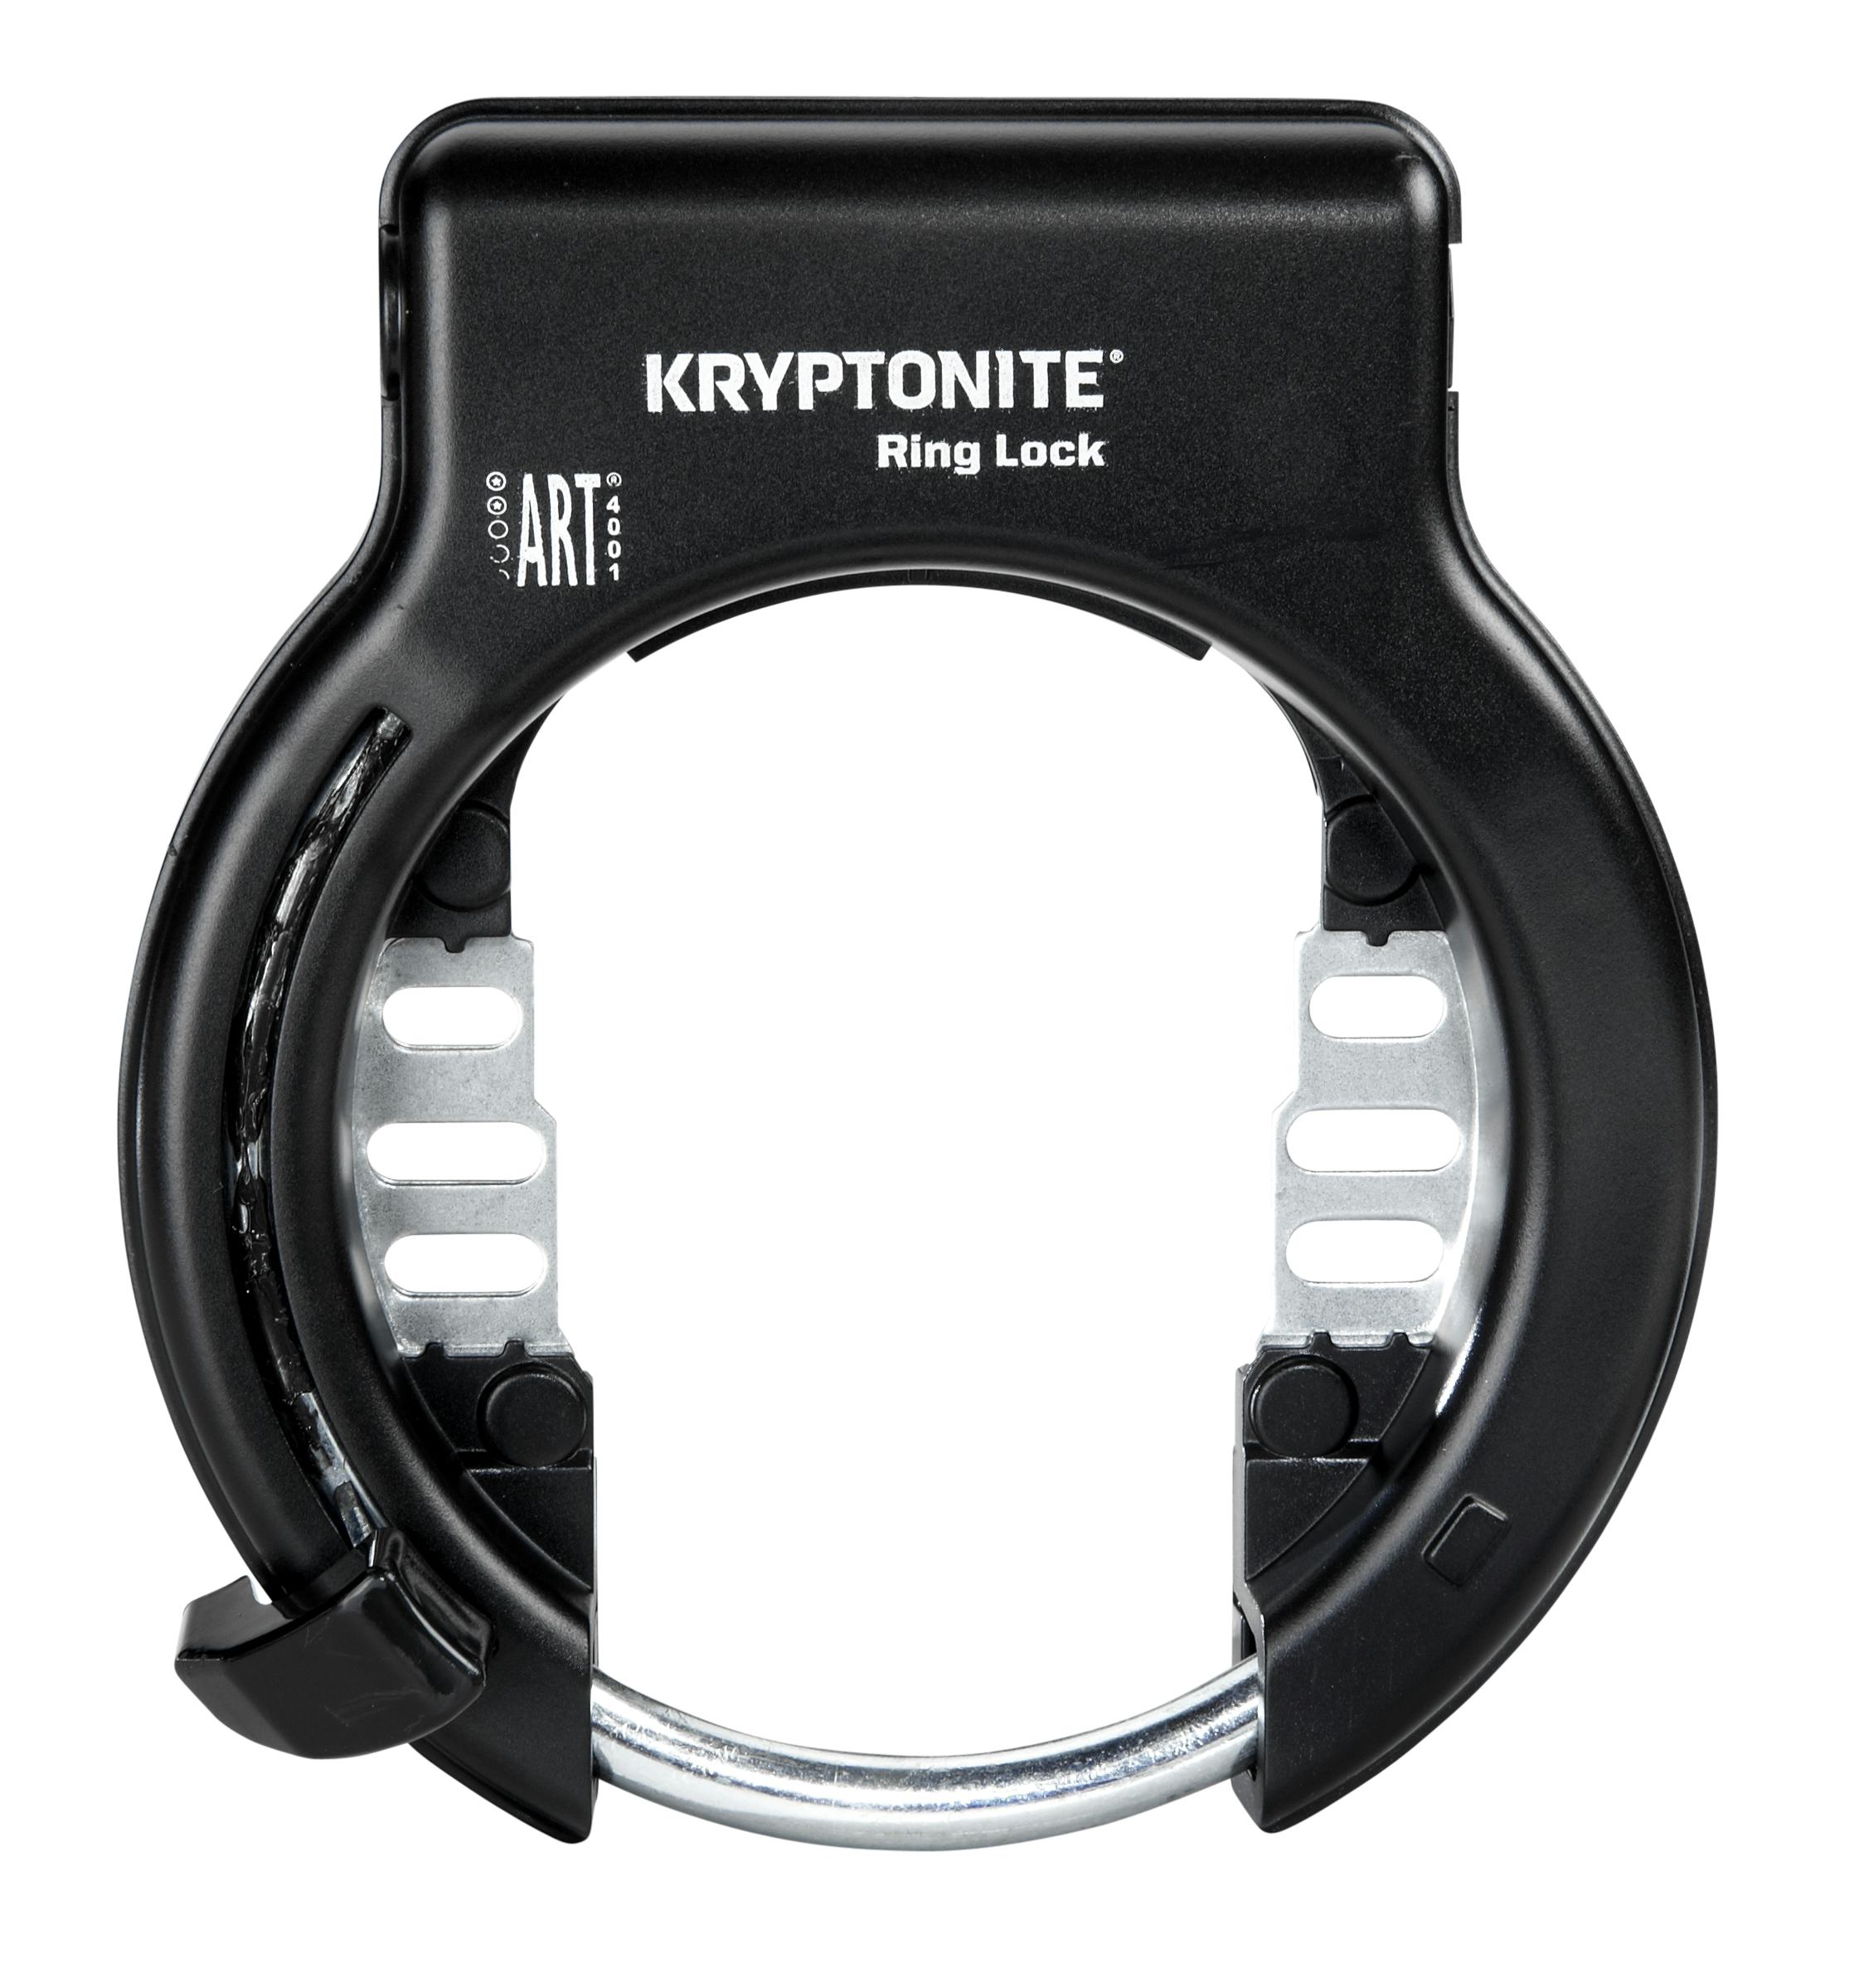 The Ring Lock Series includes both key retaining and non-key retaining ring locks. – Photo Kryptonite